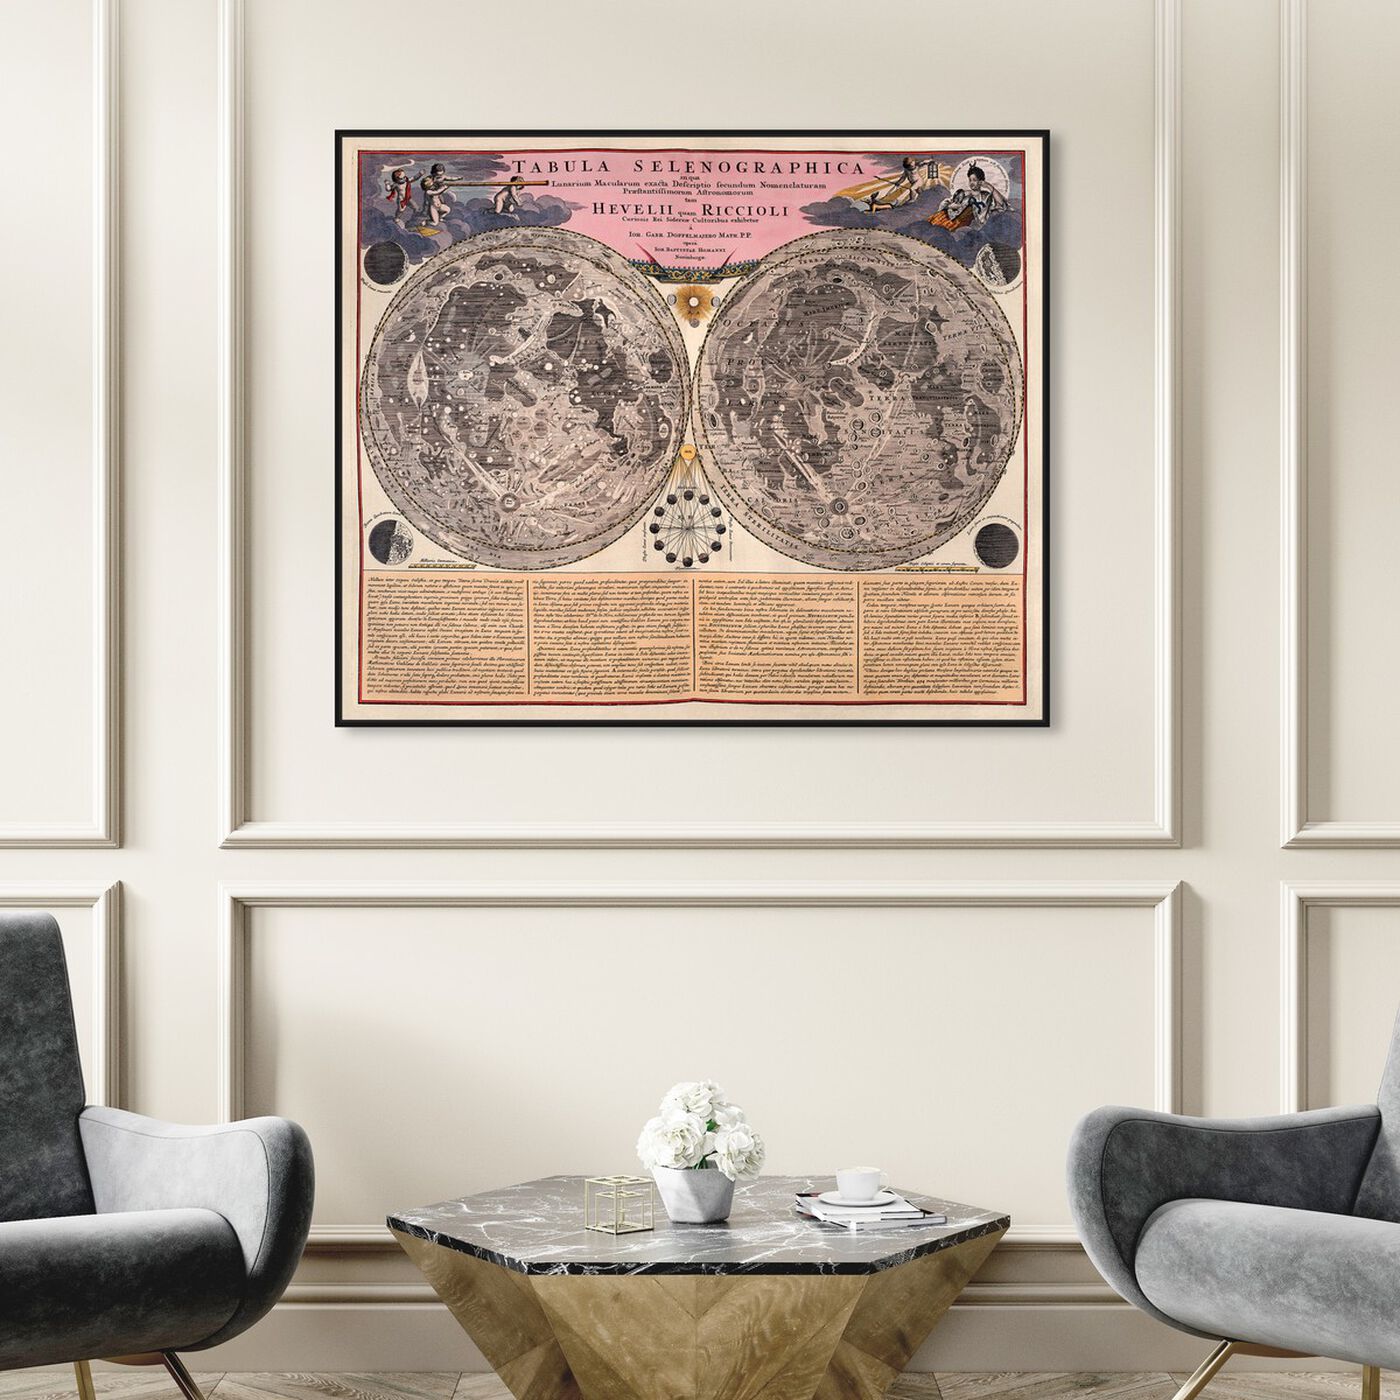 Hanging view of Tabula Selenographica featuring maps and flags and world maps art.